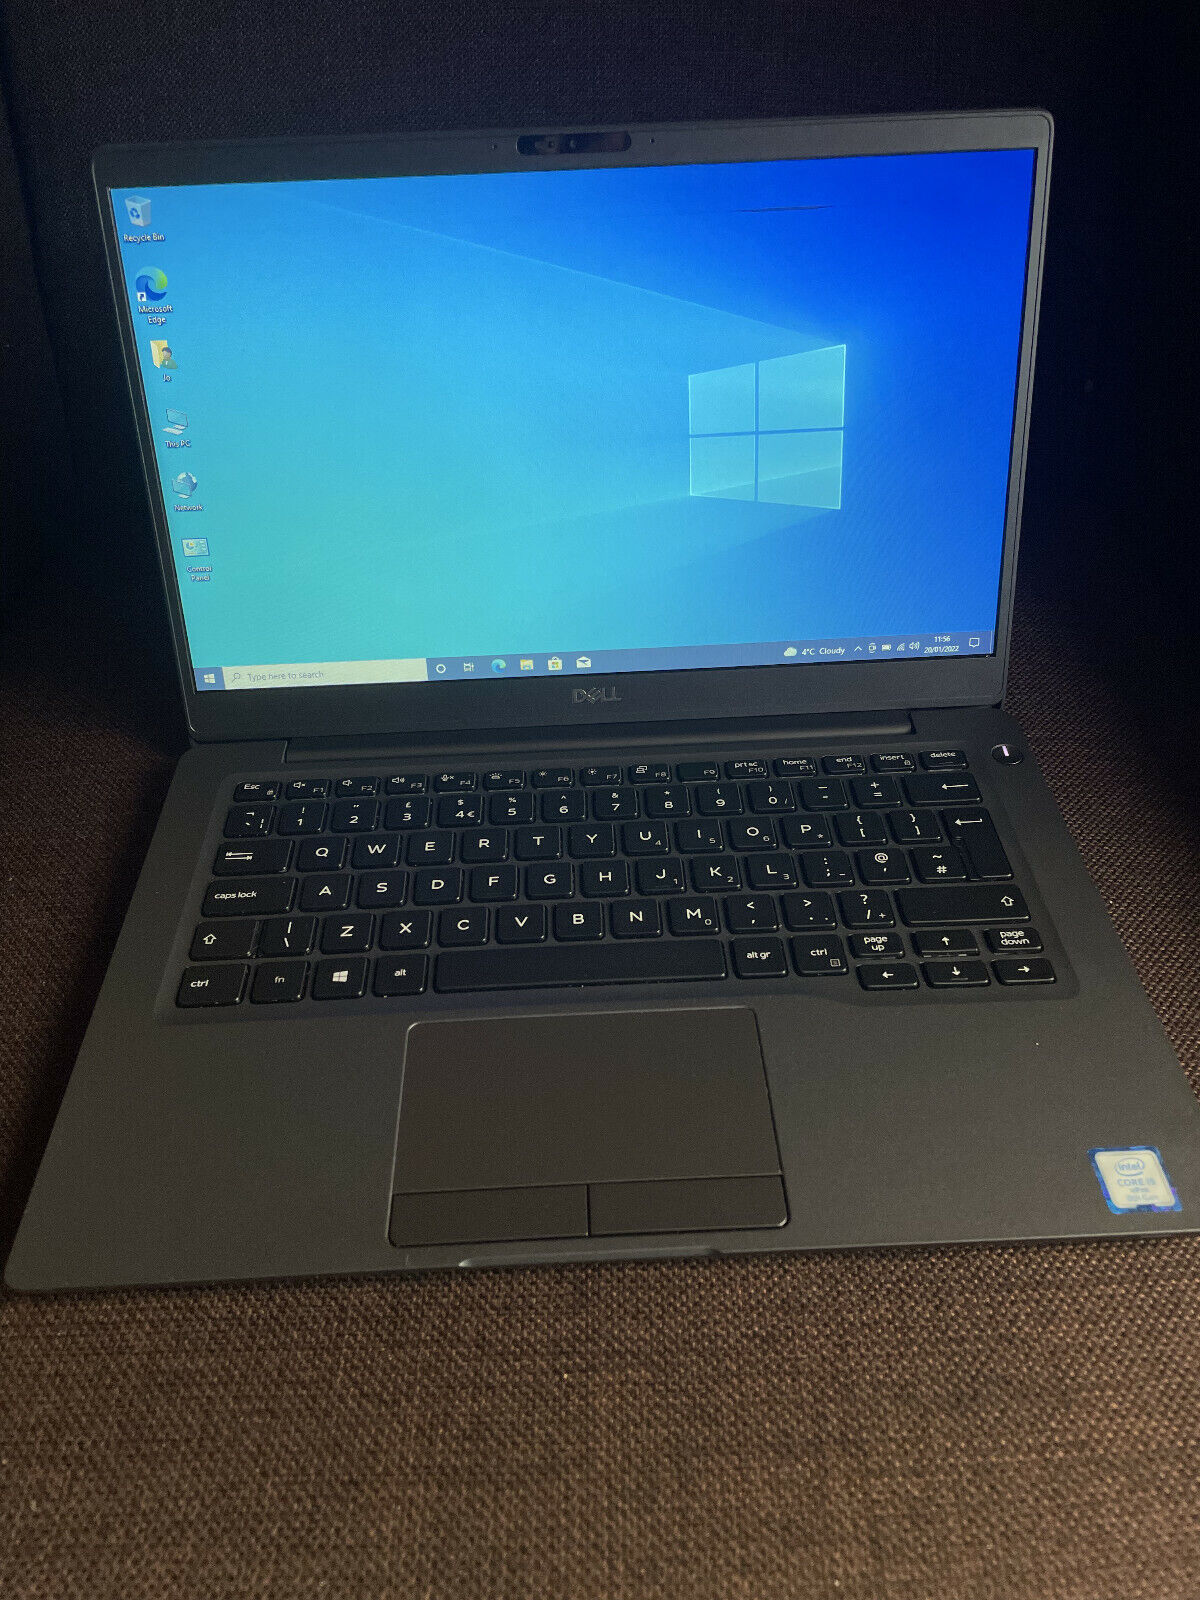 Buy Used Laptop Dell Latitude 7300 Non Touch (Renewed) - SNAP TECH - A ...